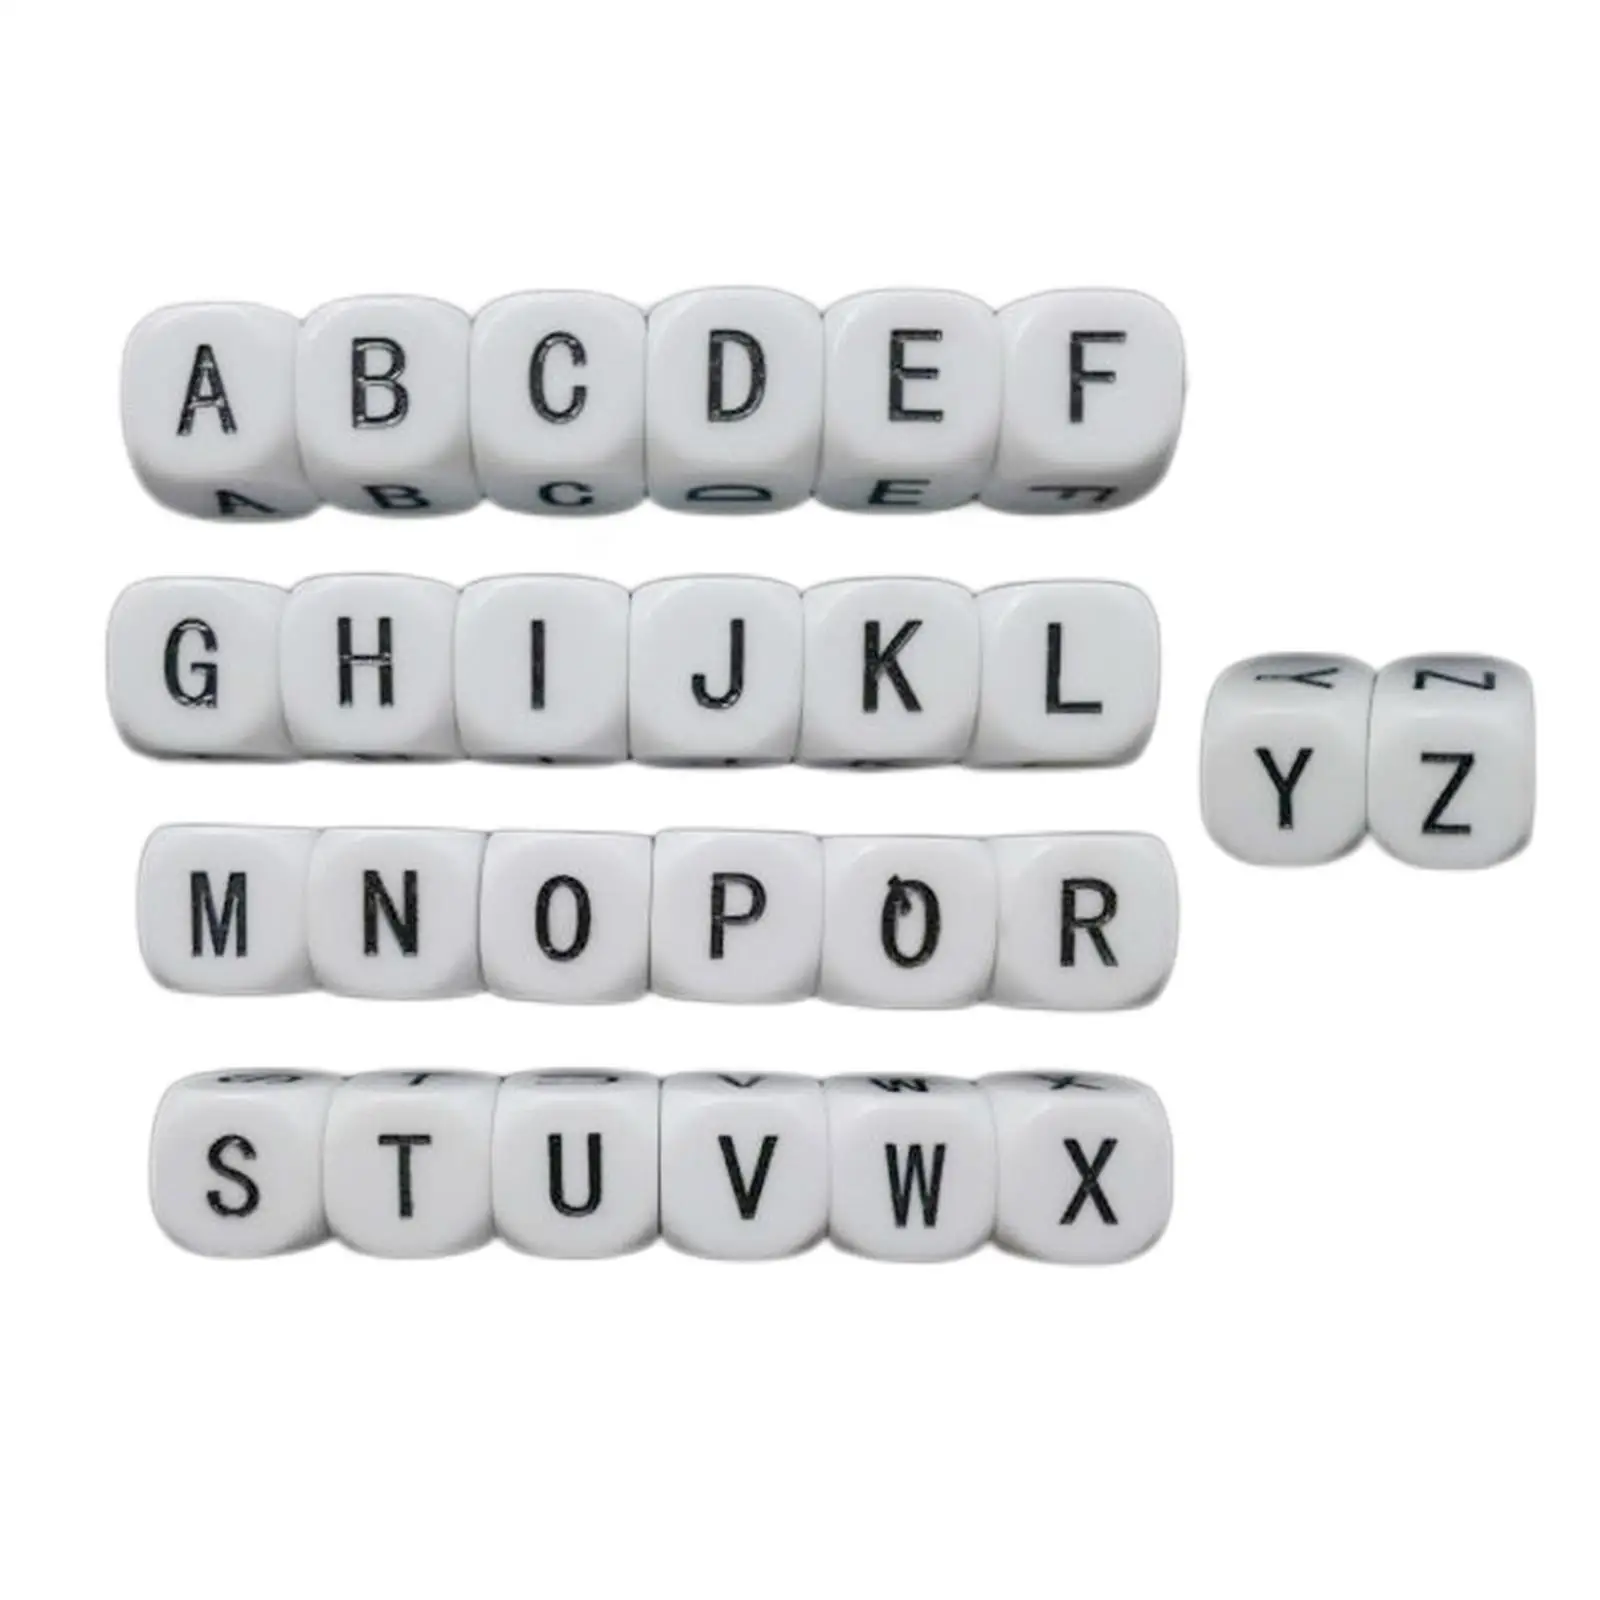 26Pcs Acrylic Letter Dice Standard Game Dice Six Sided for Early Learning Toy Party Favors